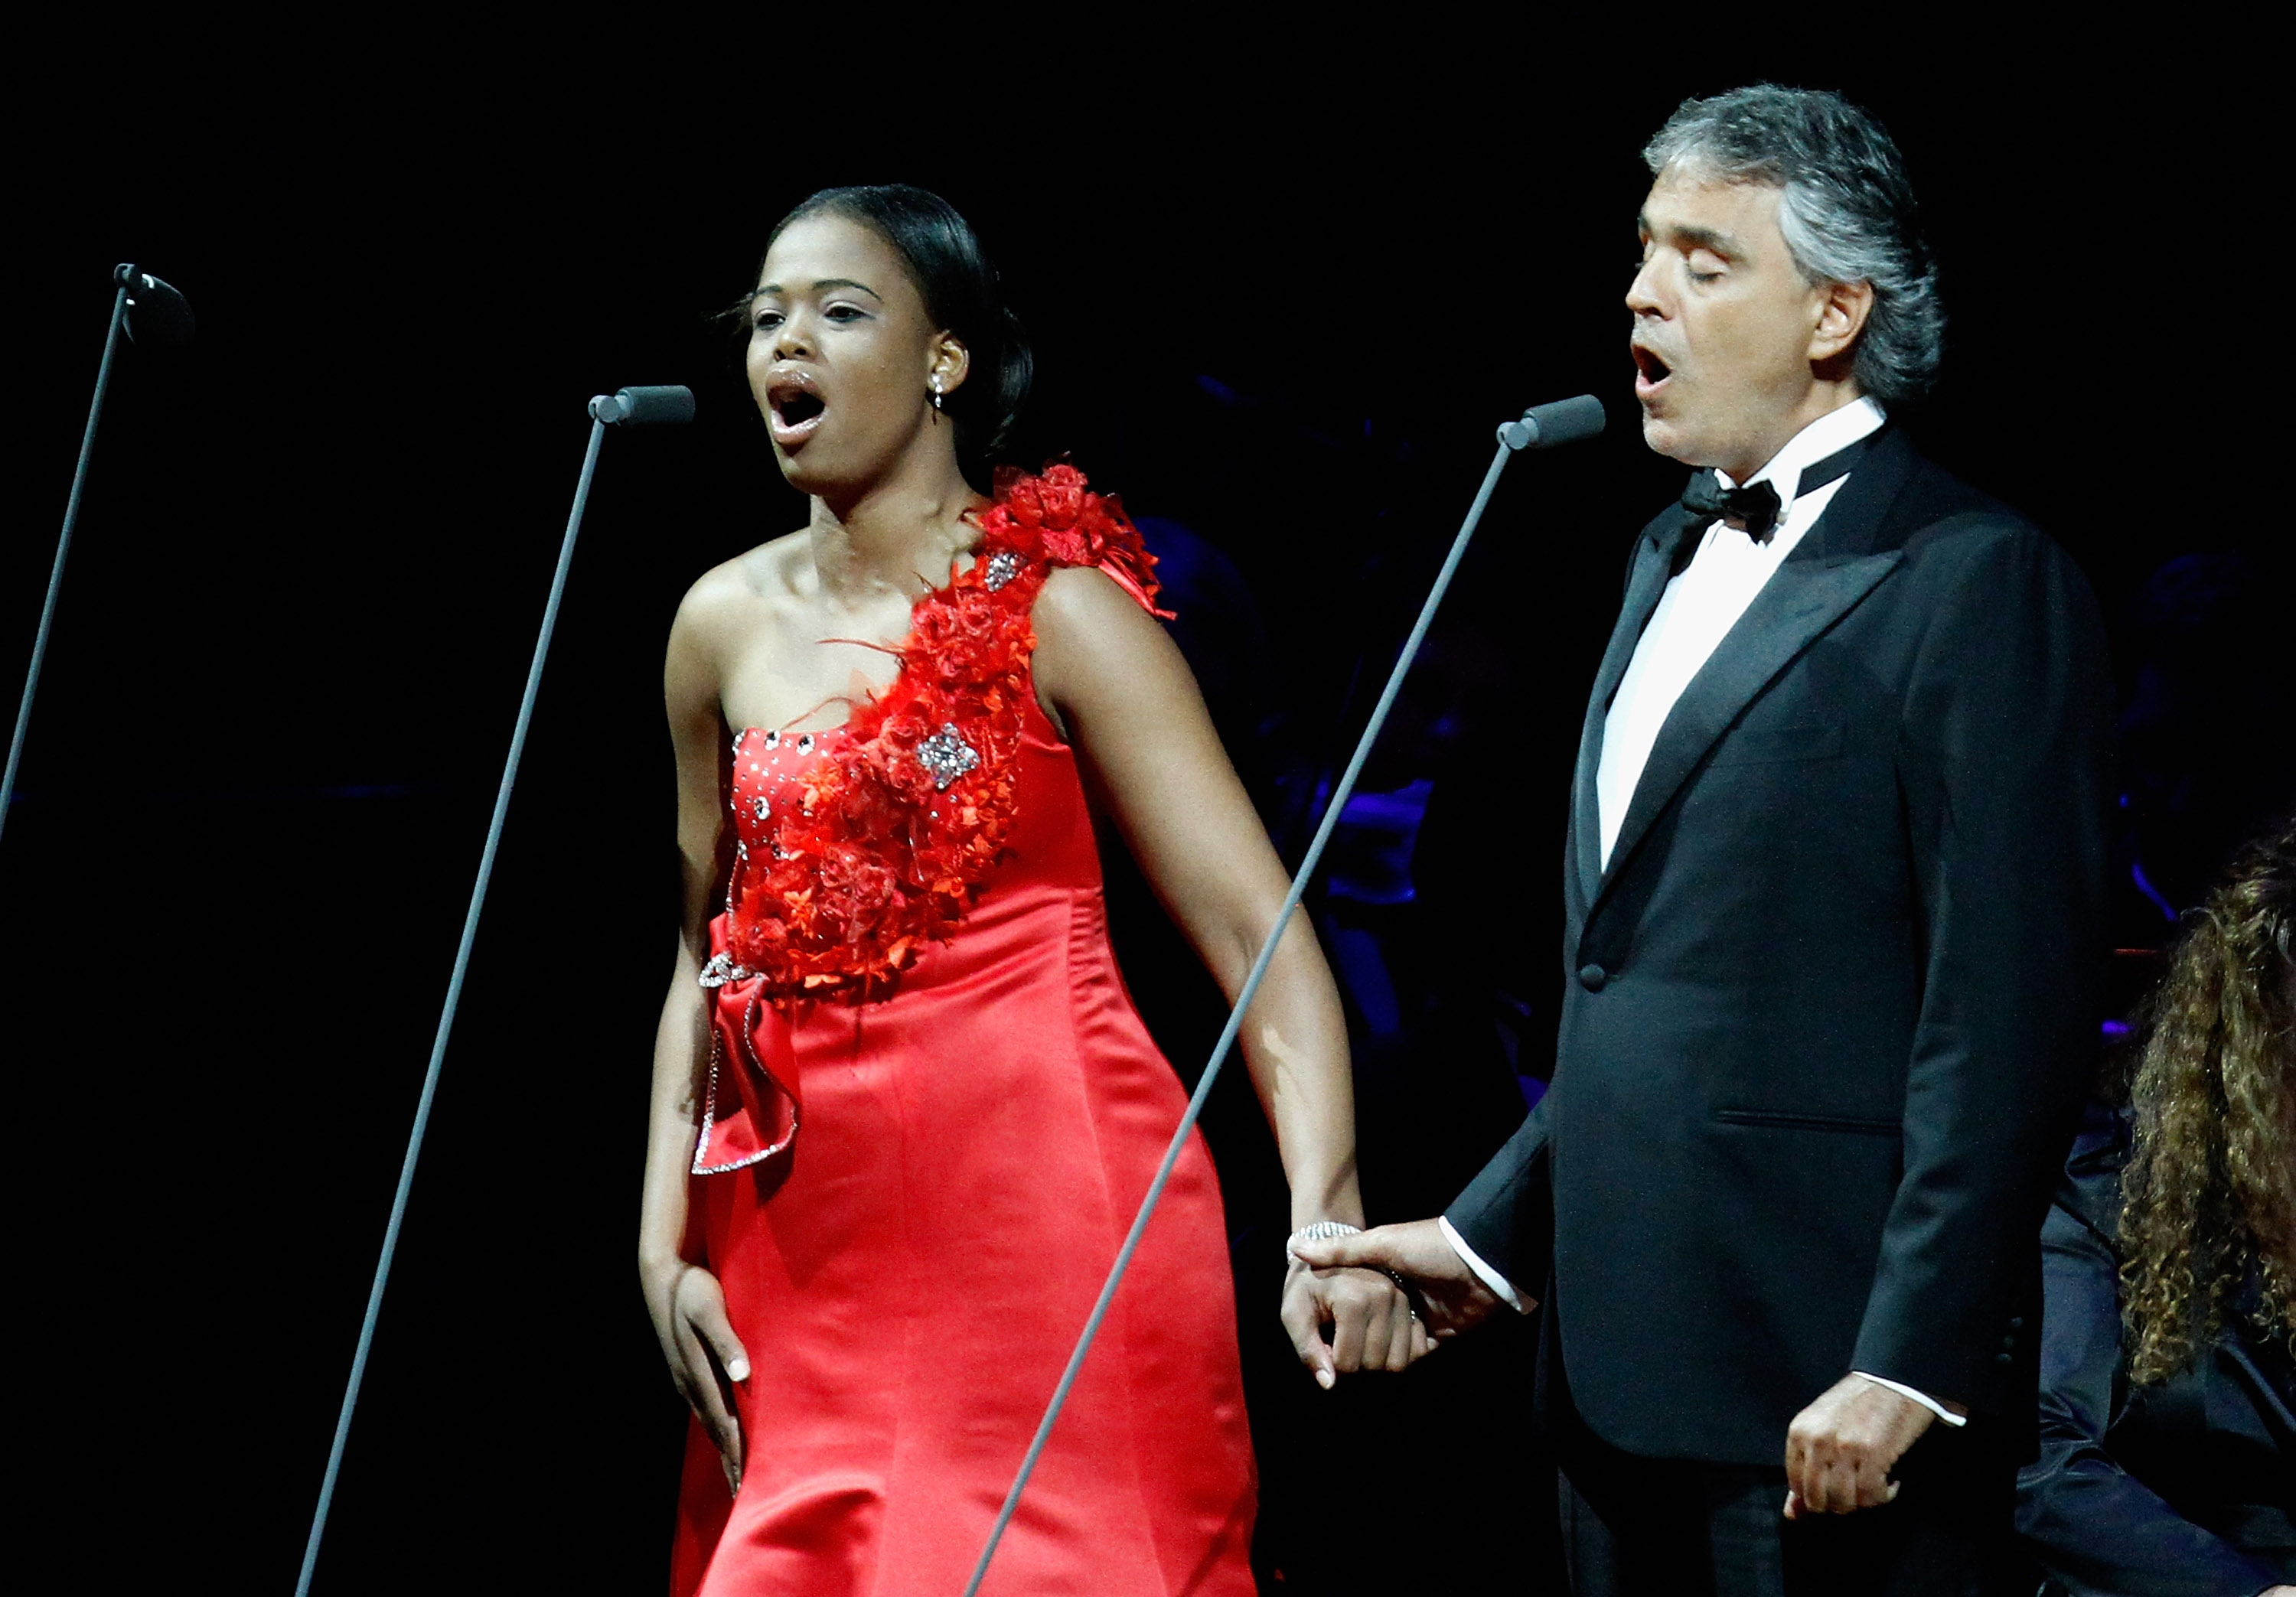 JOHANNESBURG, SOUTH AFRICA - JULY 09: South African soprano Pretty Yende and tenor Andrea Bocelli perform on stage during the Celebrate Africa The Grand Finale at the Coca Cola Dome on July 9, 2010 in Johannesburg, South Africa. (Photo by Michelly Rall/Getty Images)